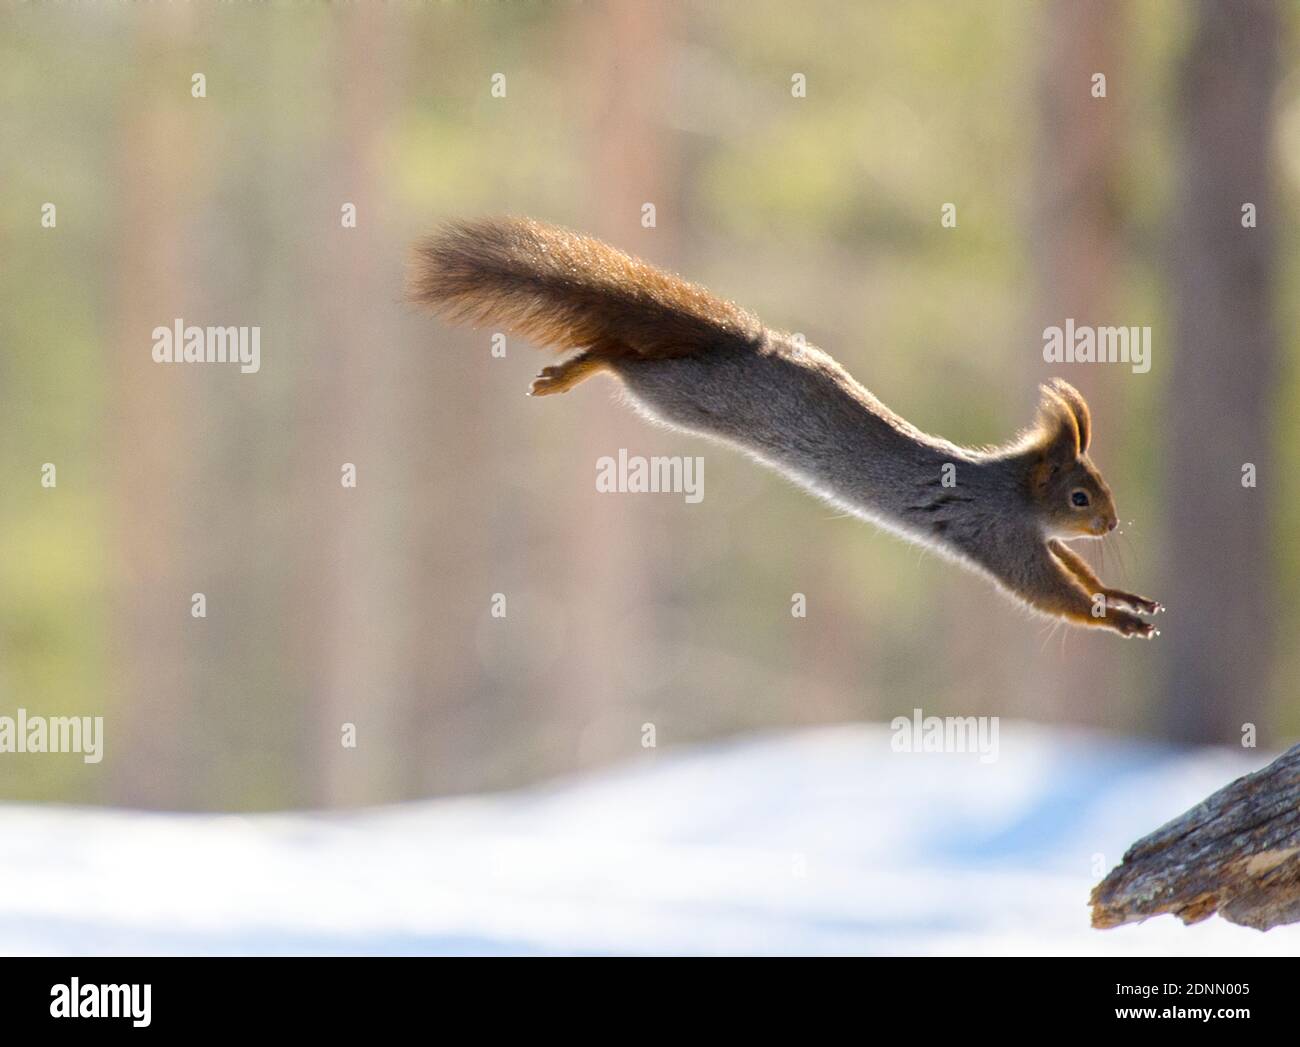 Squirrel jumping Stock Photo